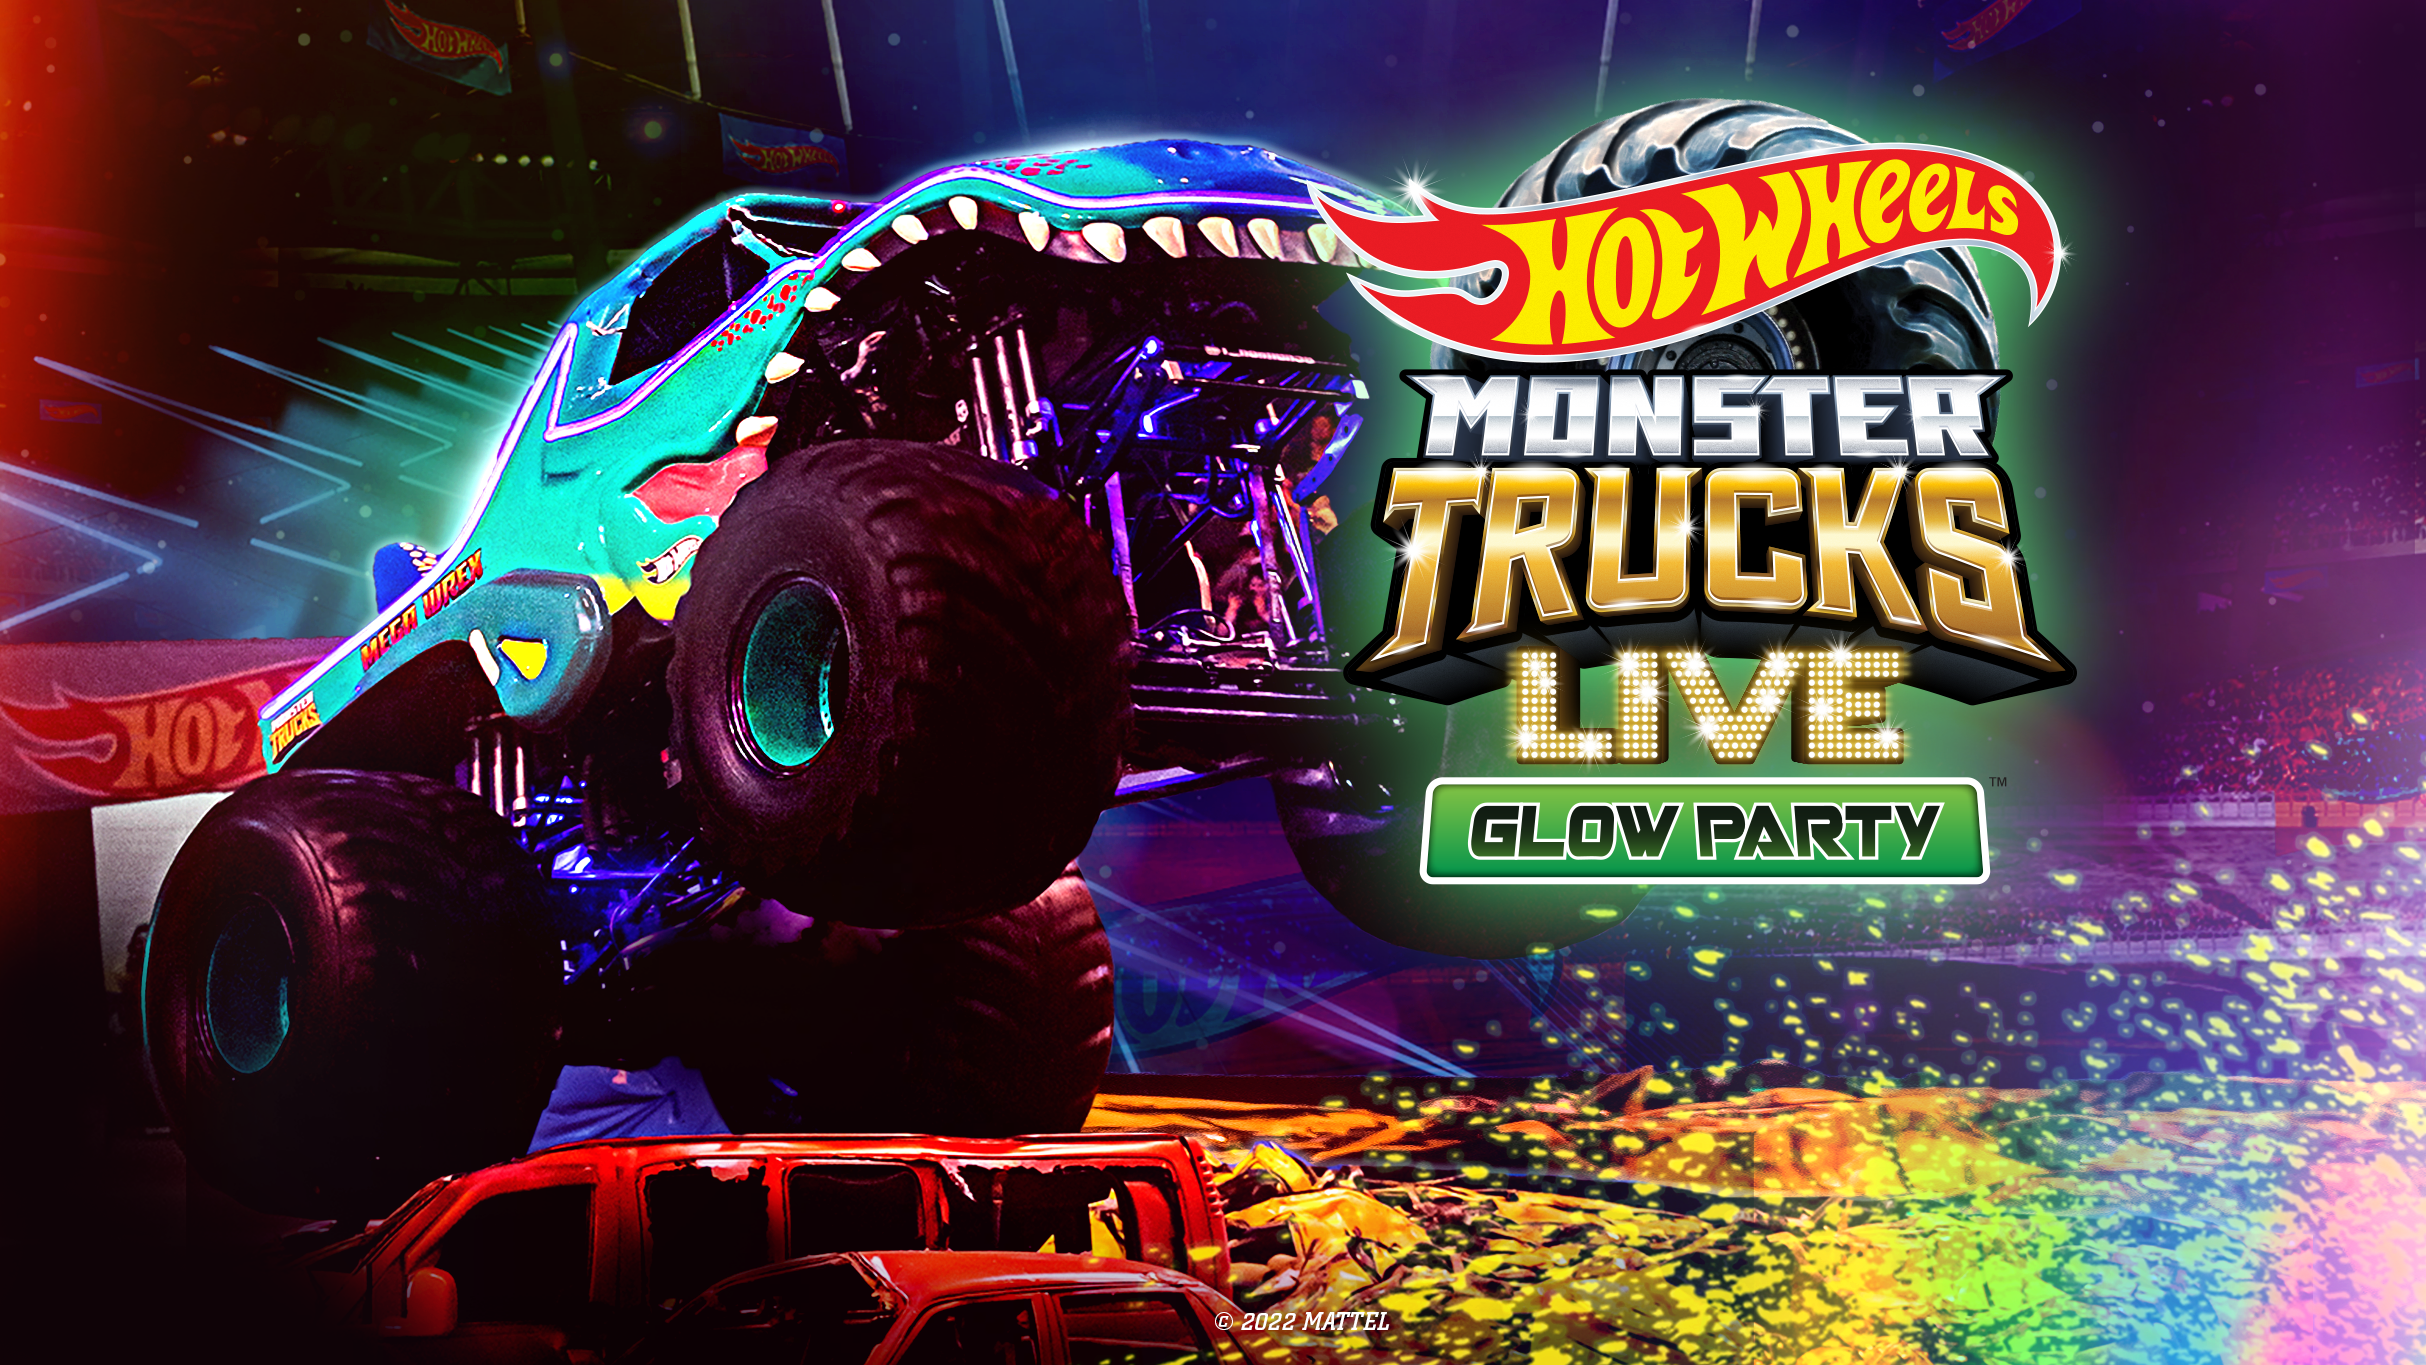 Hot Wheels Monster Trucks Live Glow Party - Council Bluffs, IA 51501